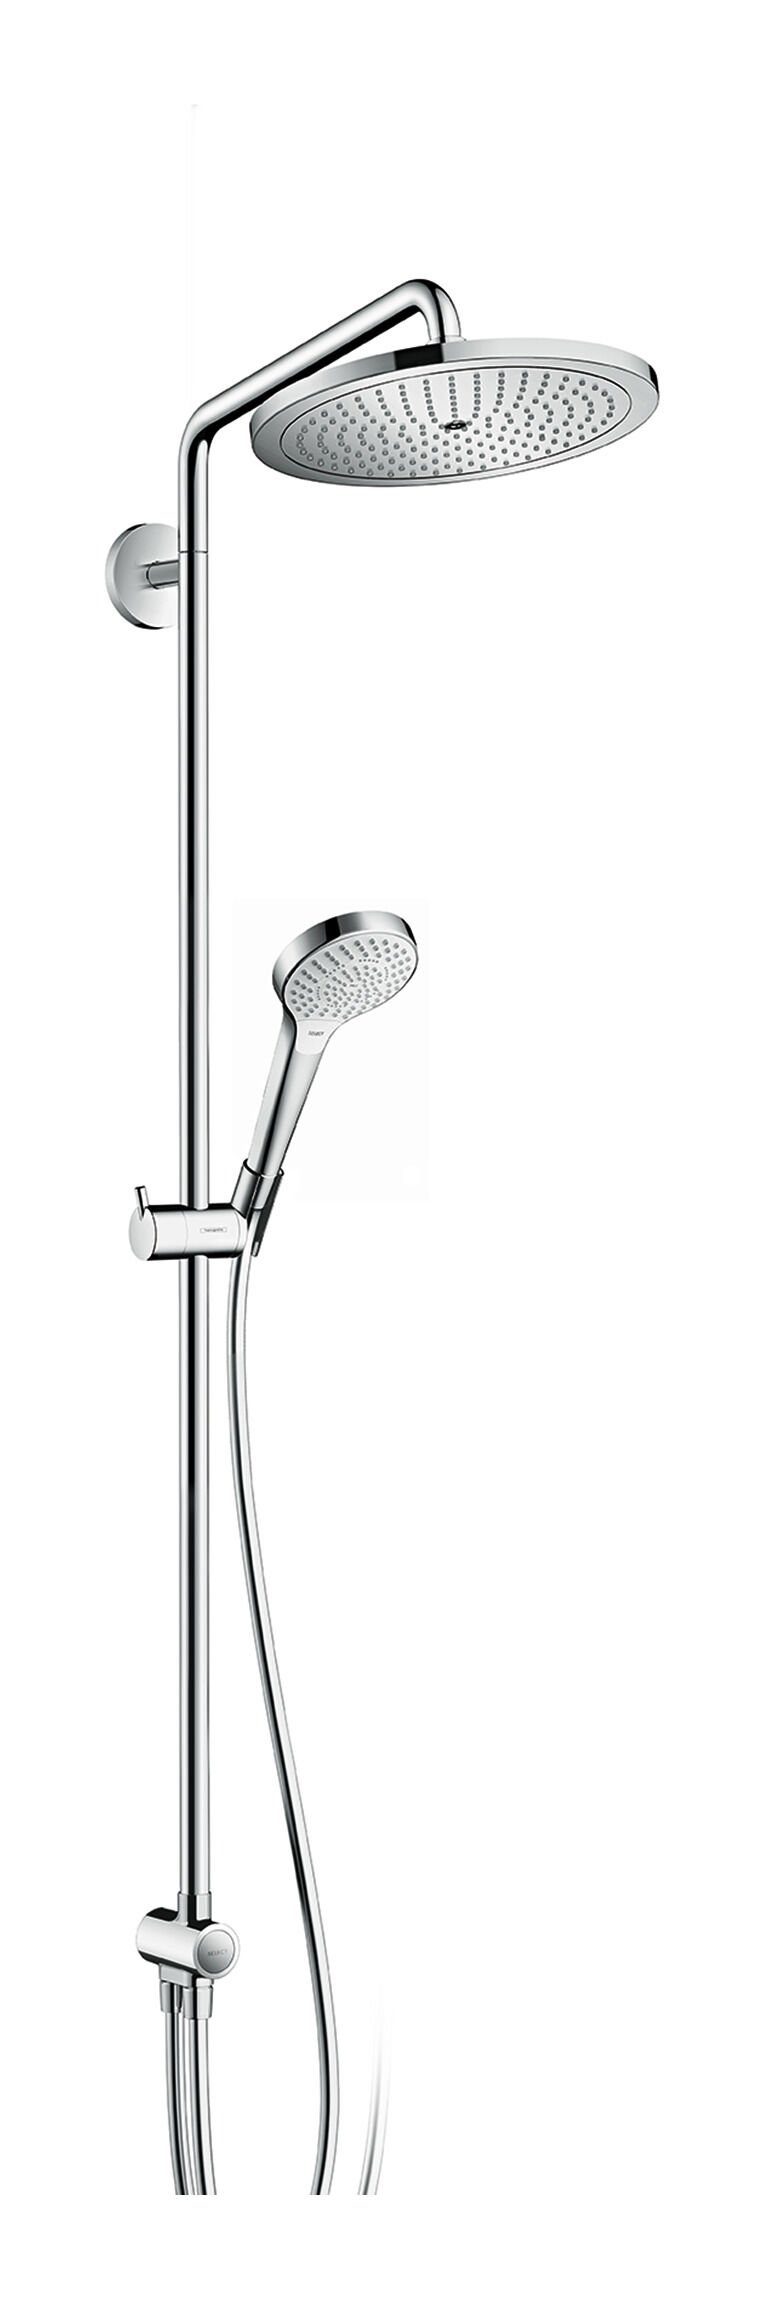 hansgrohe Duschsystem Croma Select S Showerpipe, Höhe 122.4 cm, 280 1jet Reno - Chrom